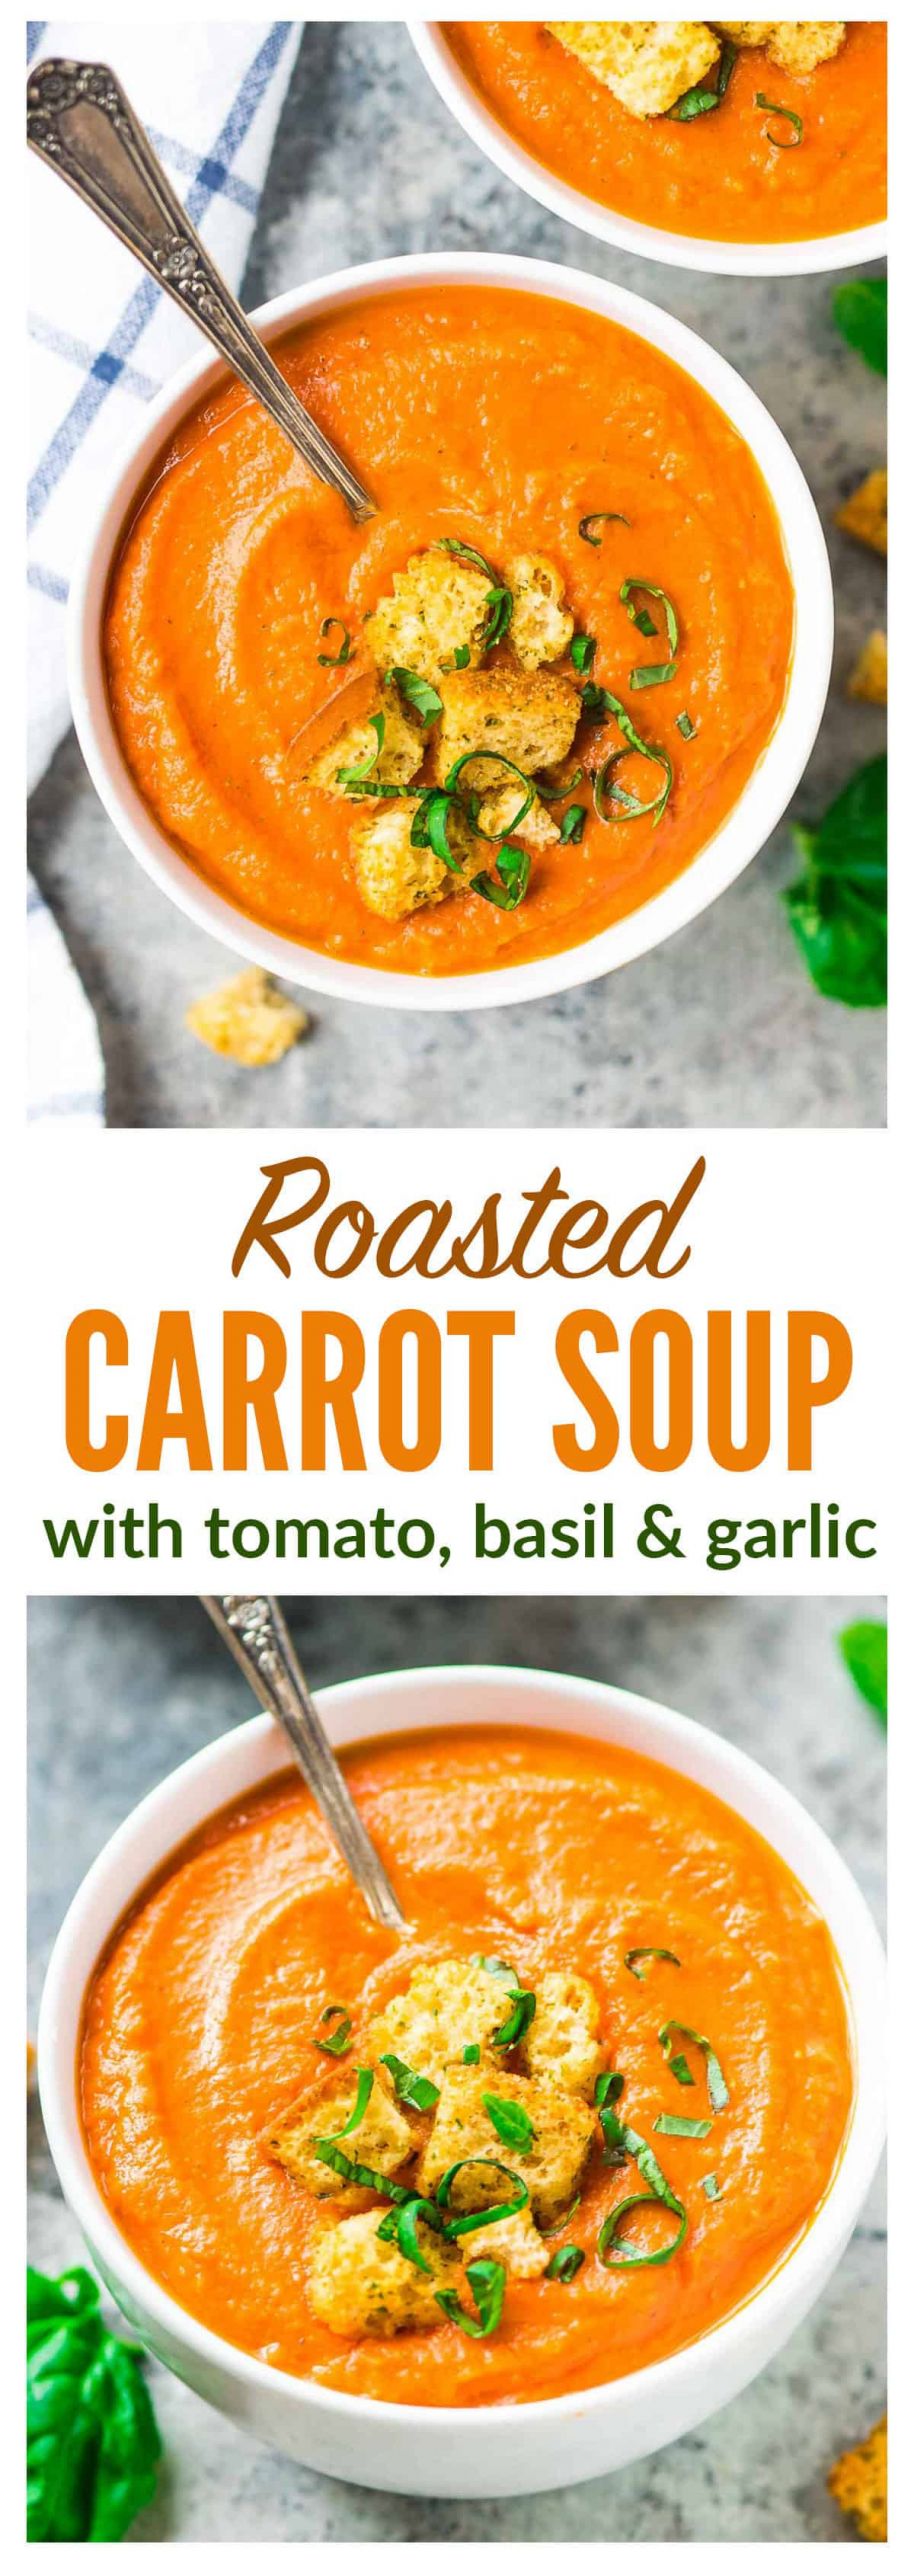 Carrot Soup Recipes
 Roasted Carrot Soup Recipe